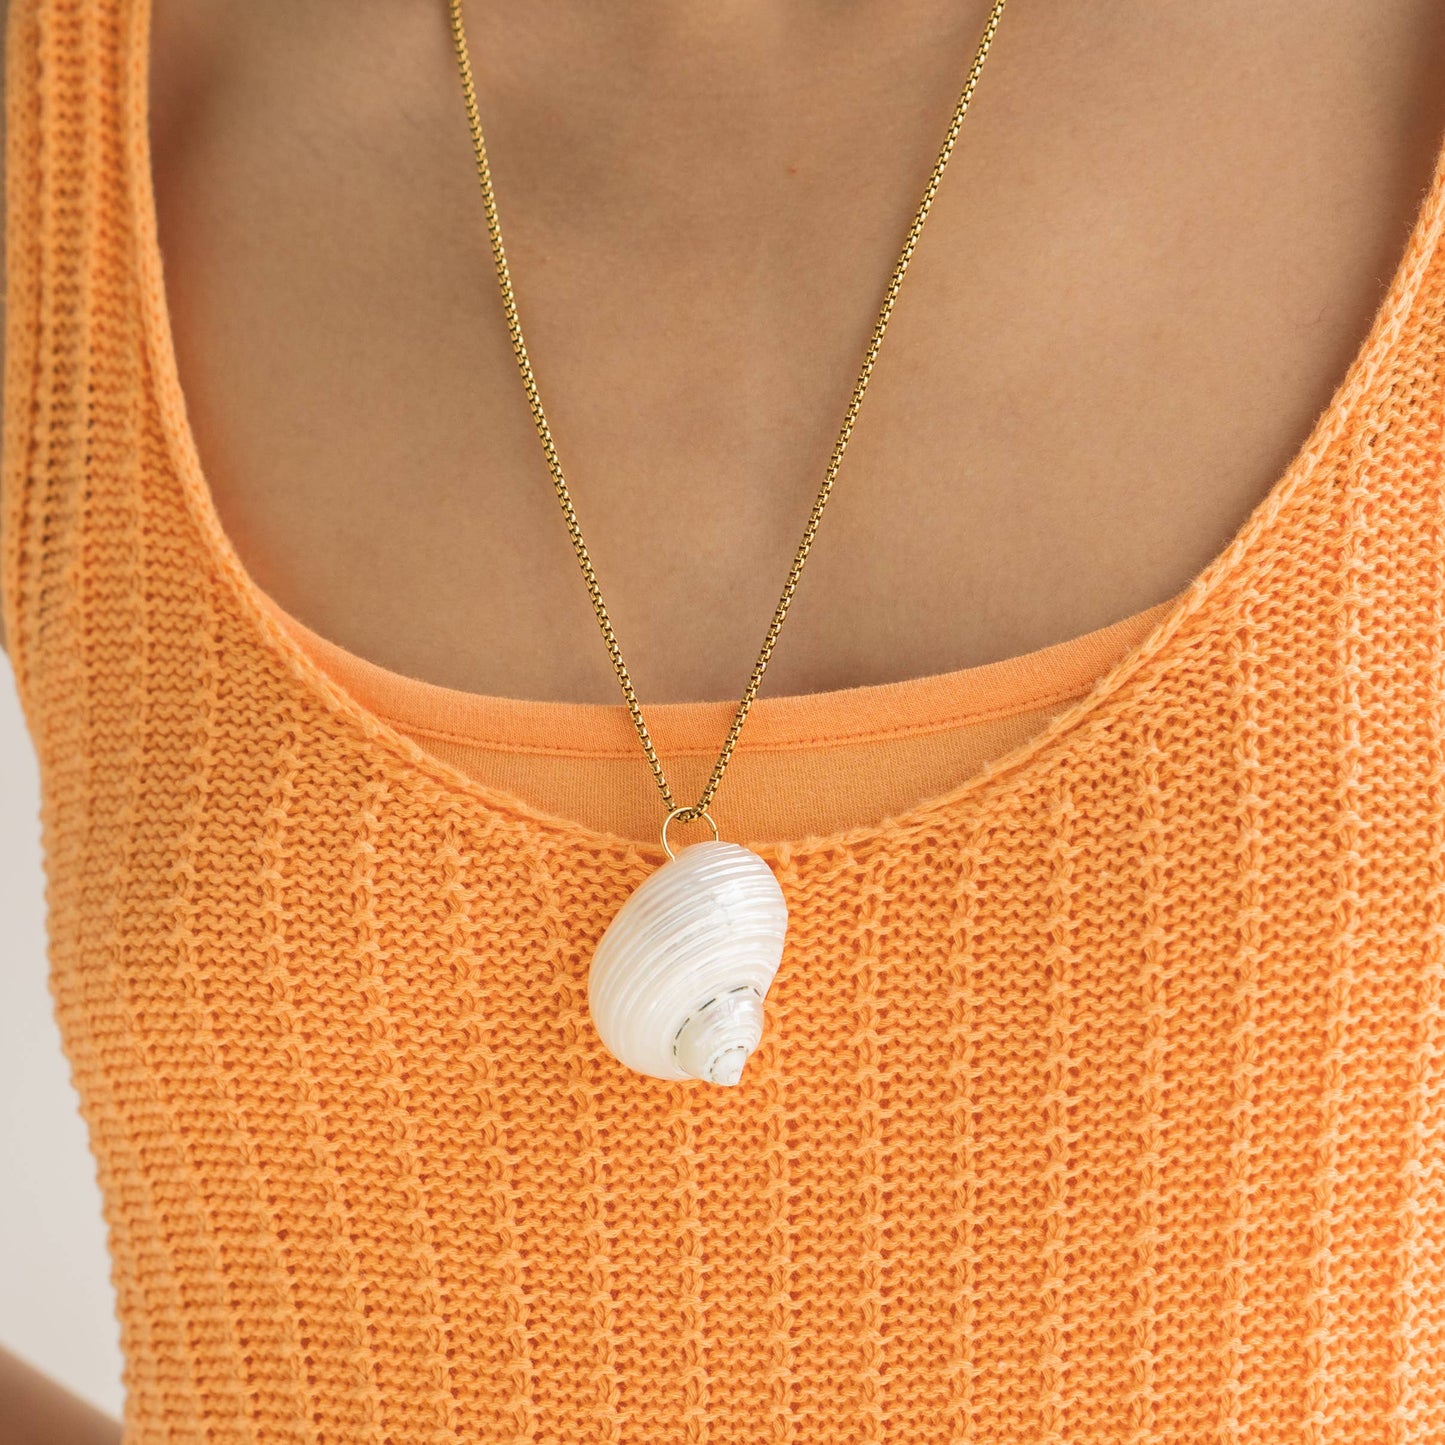 Shell Necklace Long